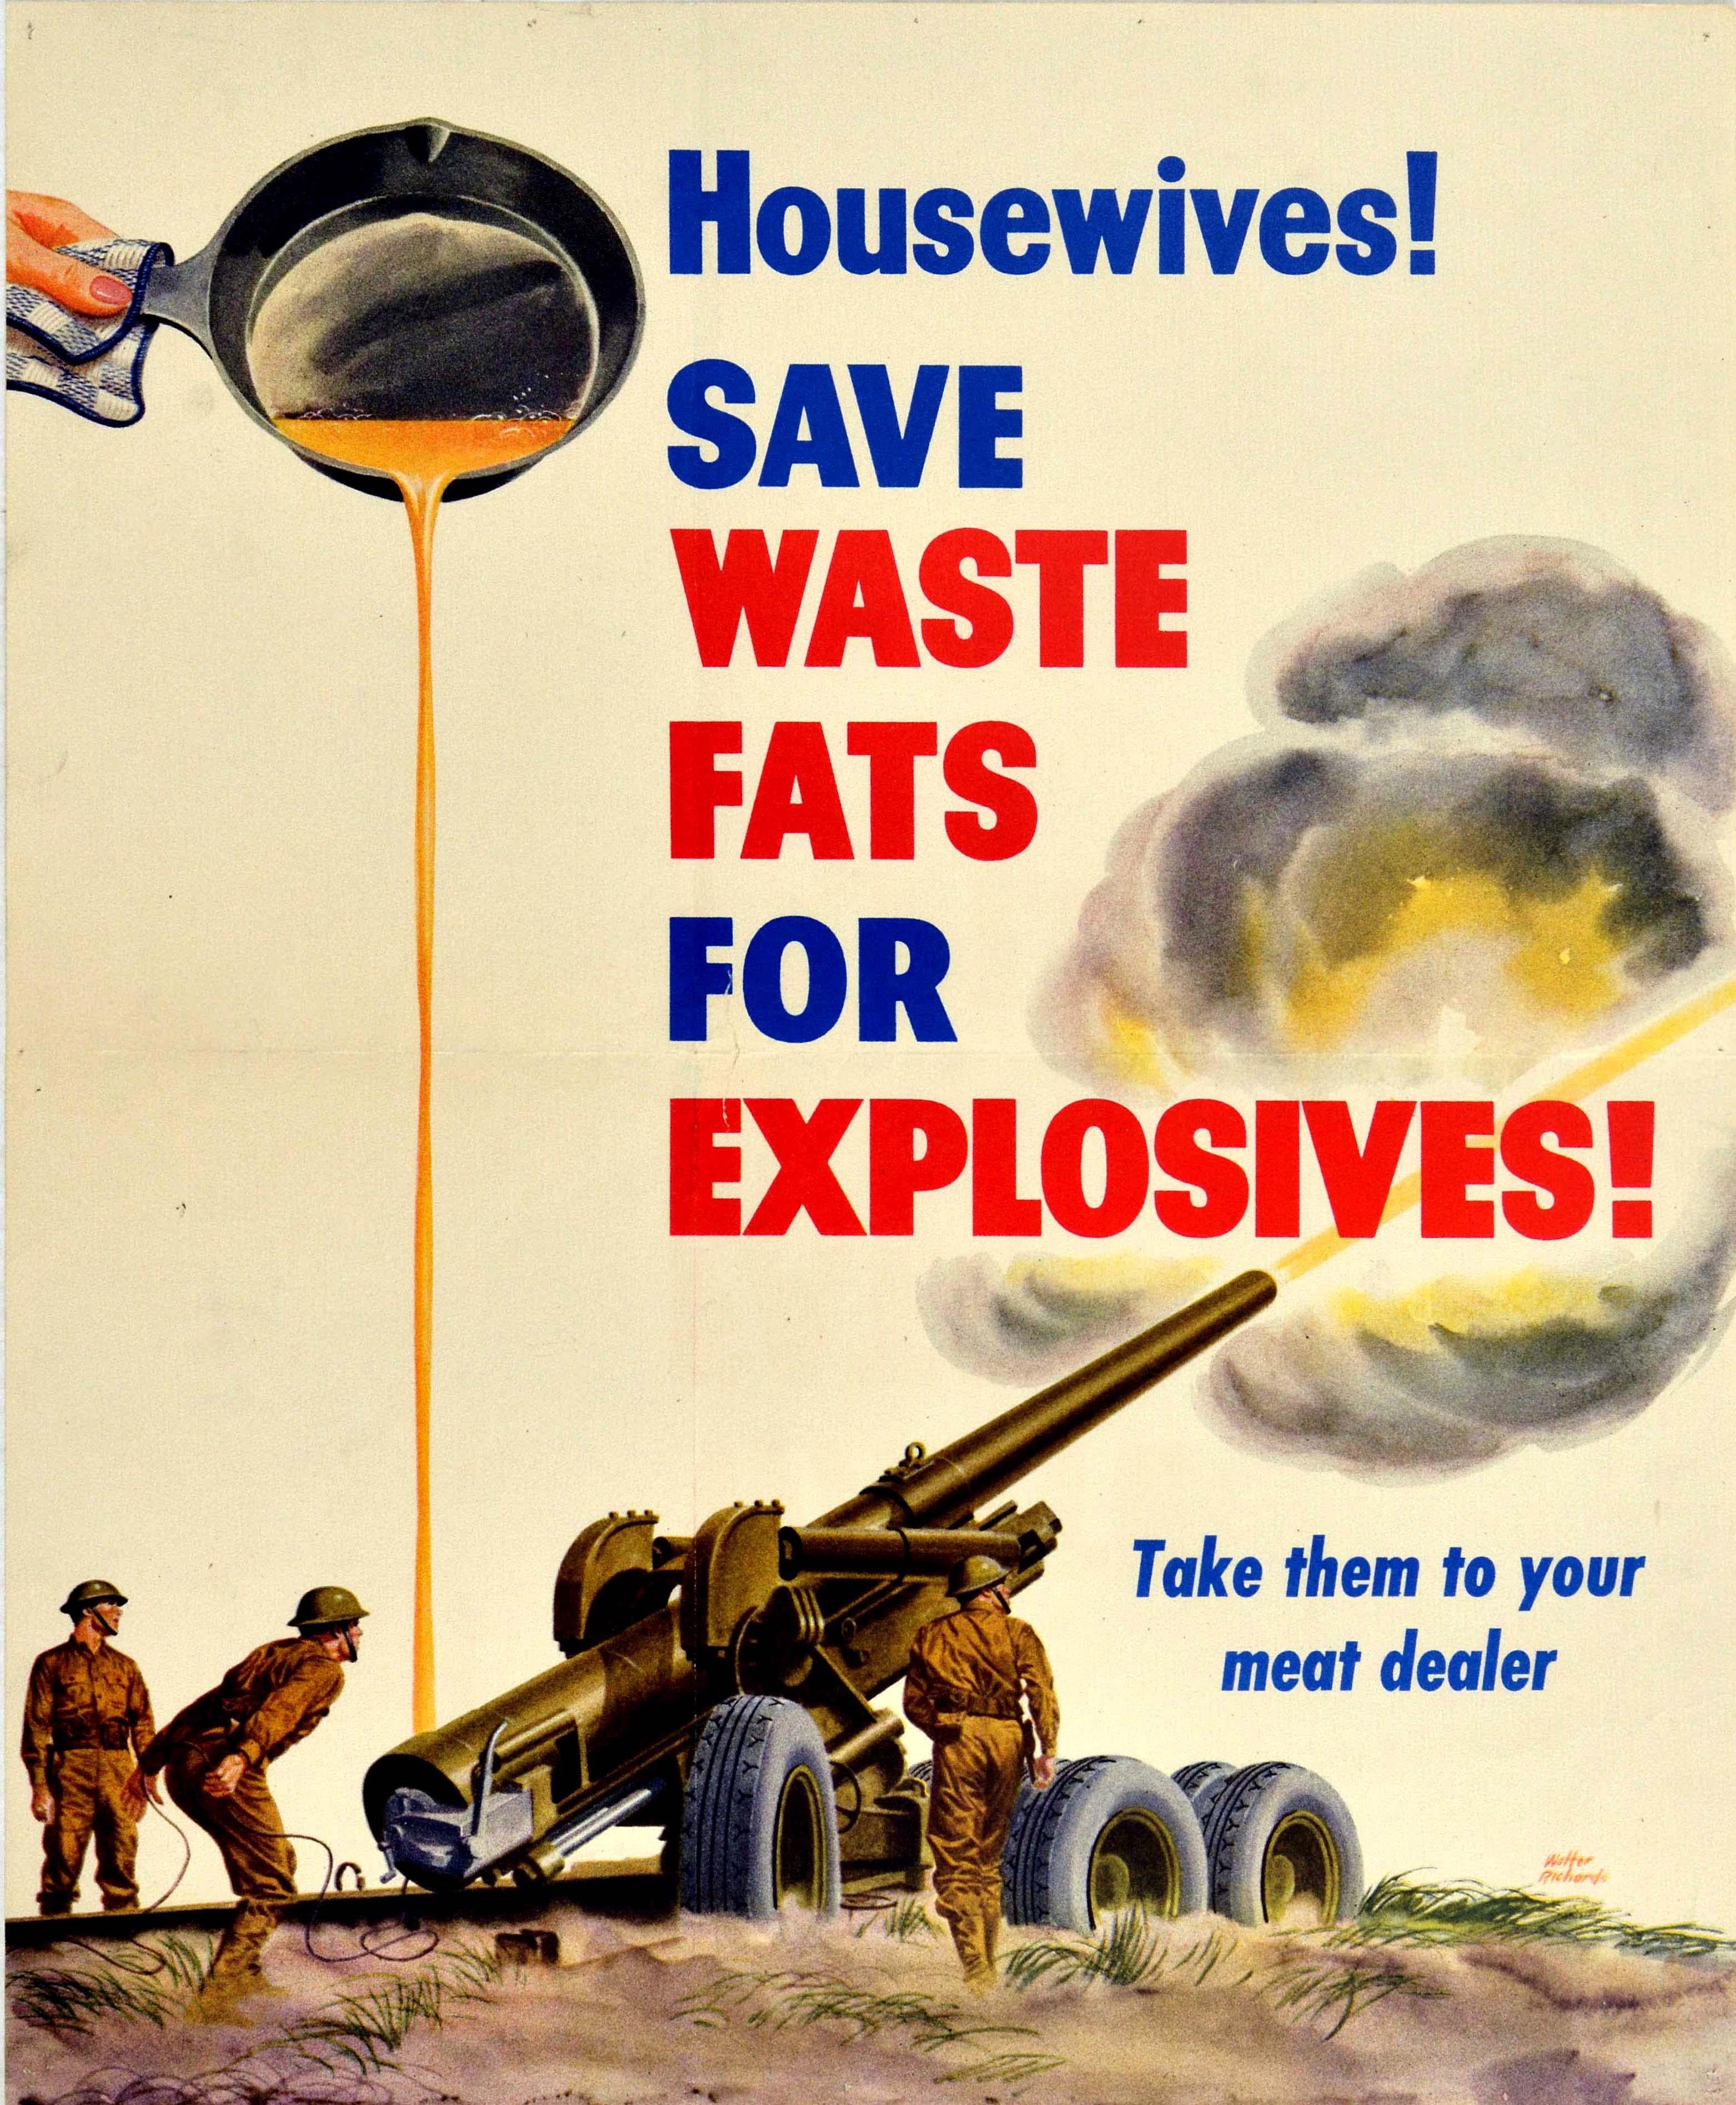 Walter Richards Print - Original Vintage Poster Housewives Save Waste Fats For Explosives WWII War Army